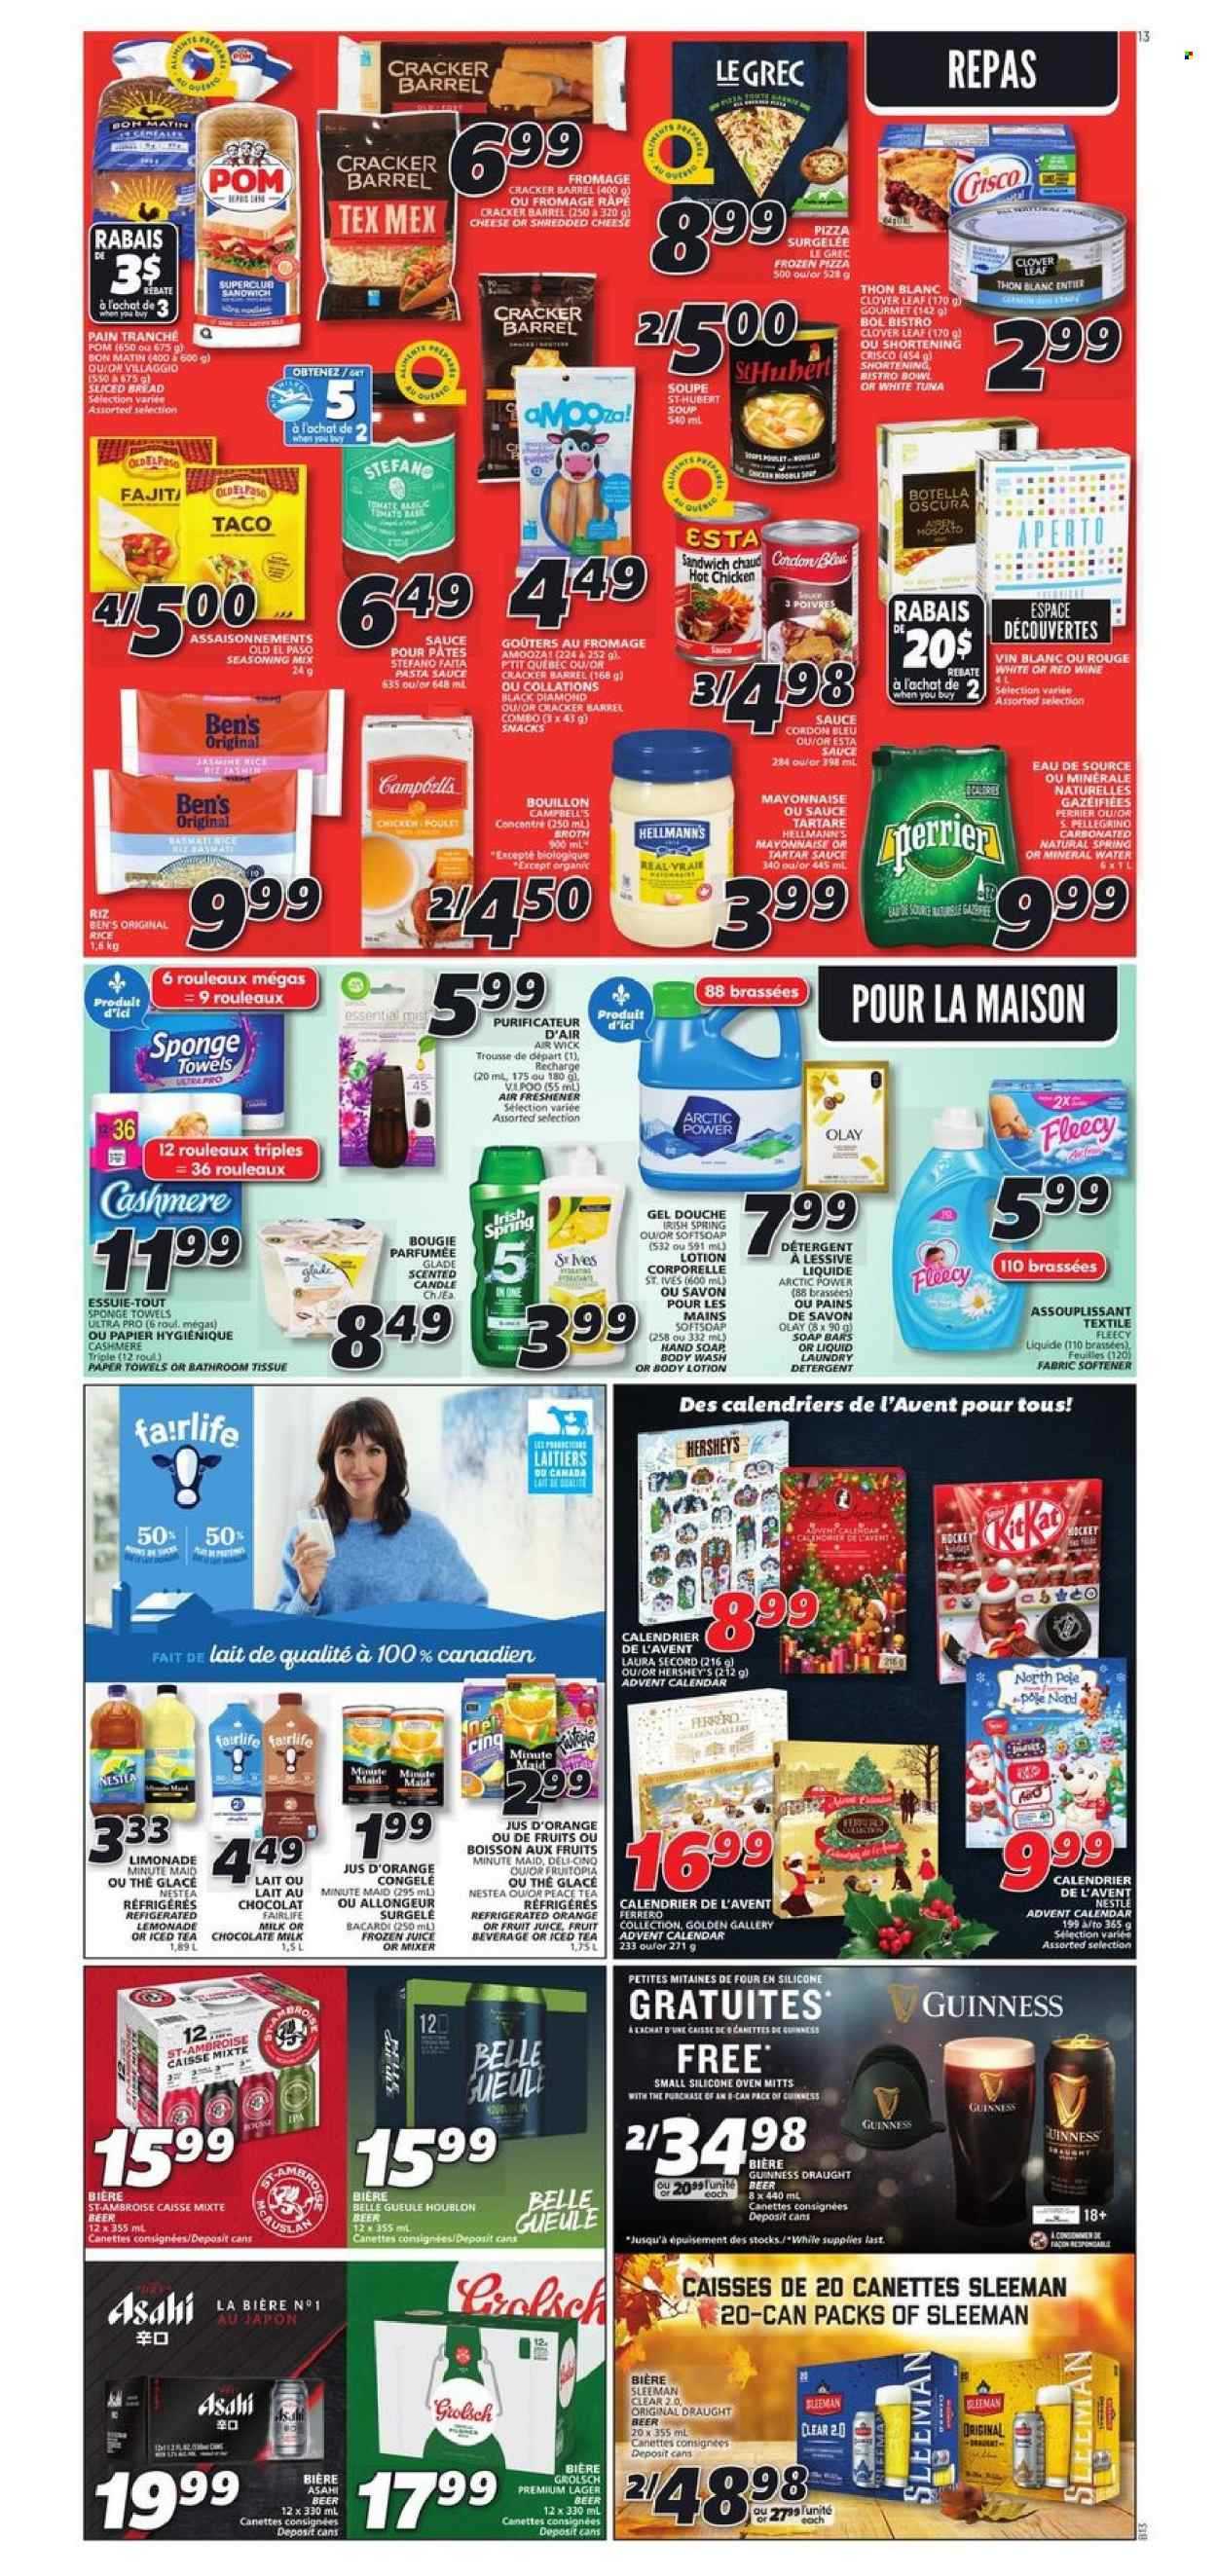 thumbnail - IGA Flyer - November 04, 2021 - November 10, 2021 - Sales products - bread, Old El Paso, Campbell's, pizza, pasta sauce, sandwich, soup, sauce, shredded cheese, advent calendar, Clover, milk, mayonnaise, Hellmann’s, Hershey's, milk chocolate, chocolate, snack, KitKat, crackers, bouillon, Crisco, shortening, broth, rice, spice, lemonade, juice, fruit juice, ice tea, Perrier, fruit punch, mineral water, San Pellegrino, Bacardi, beer, Guinness, Grolsch, Lager, IPA, Nestlé, Ferrero Rocher, cordon bleu, oranges. Page 8.